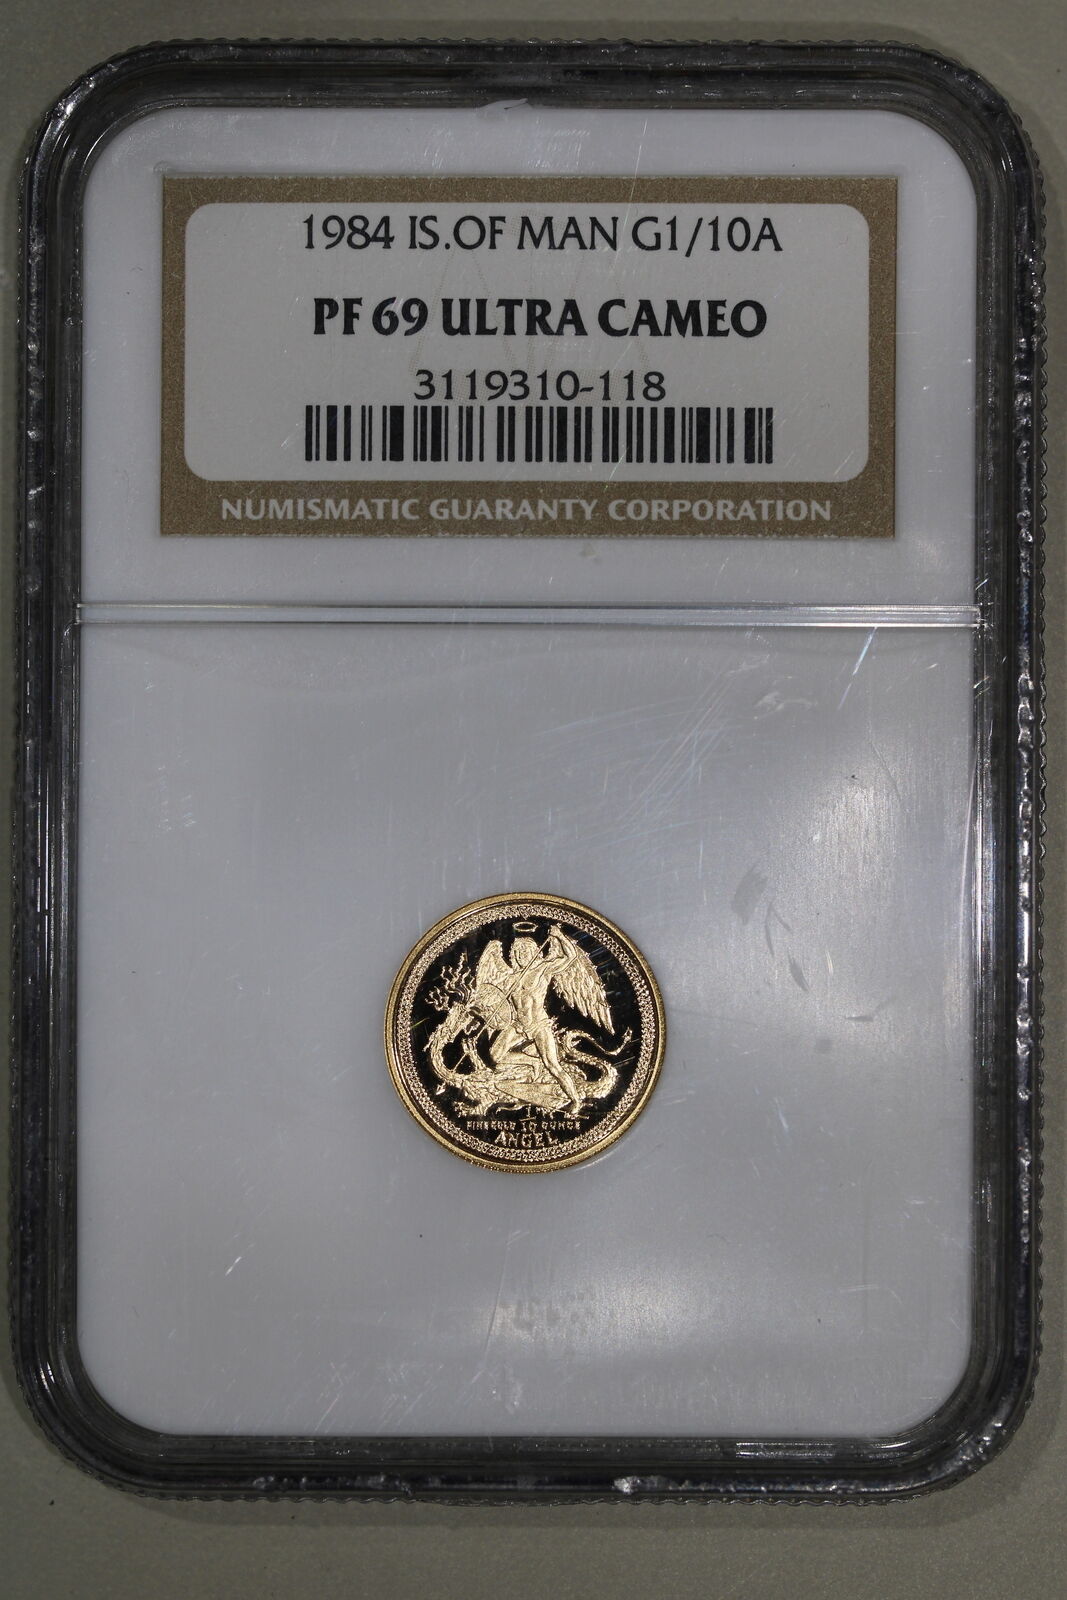 1984 (PF69 Ultra Cameo) Gold Angel - 1/10 oz Isle of Man Proof NGC Graded Coin